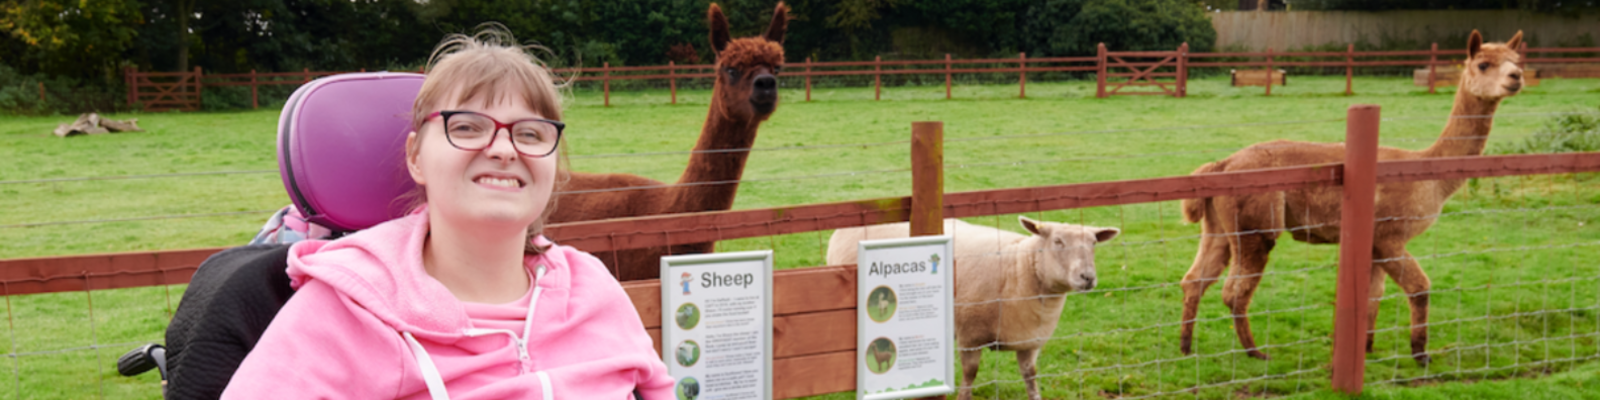 Woman in wheelchair smiling at the camera in front of a field with 2 alpacas and a sheep in the background.